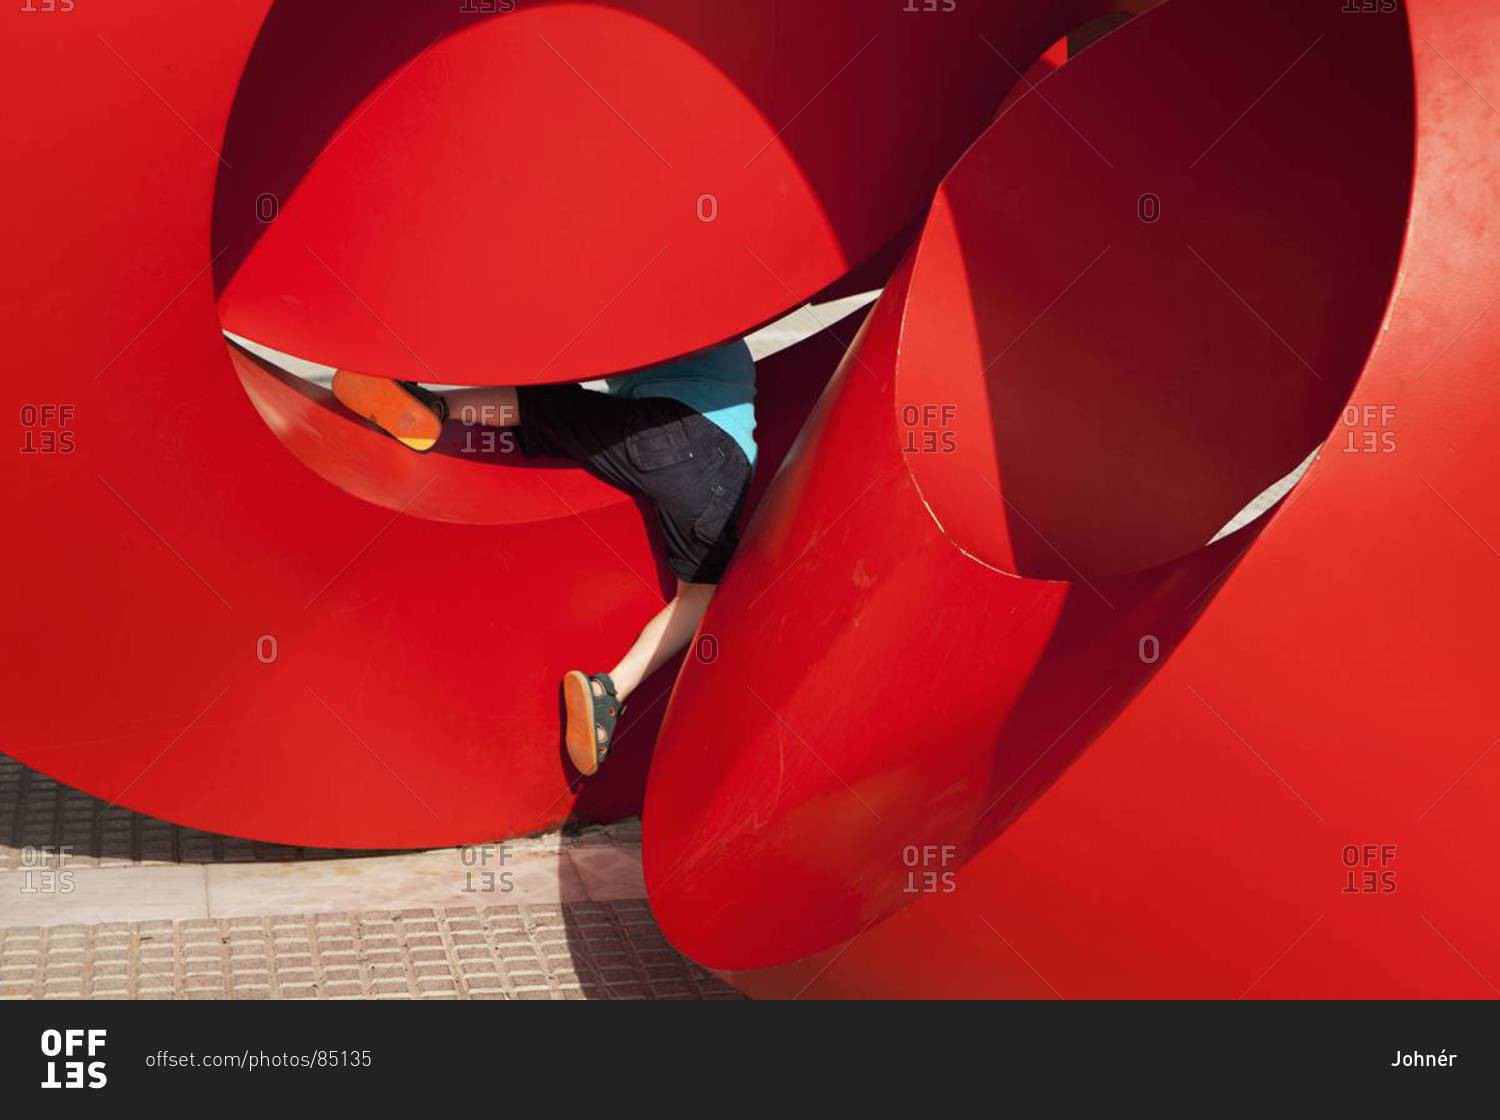 Child playing on red modern sculpture, Spain